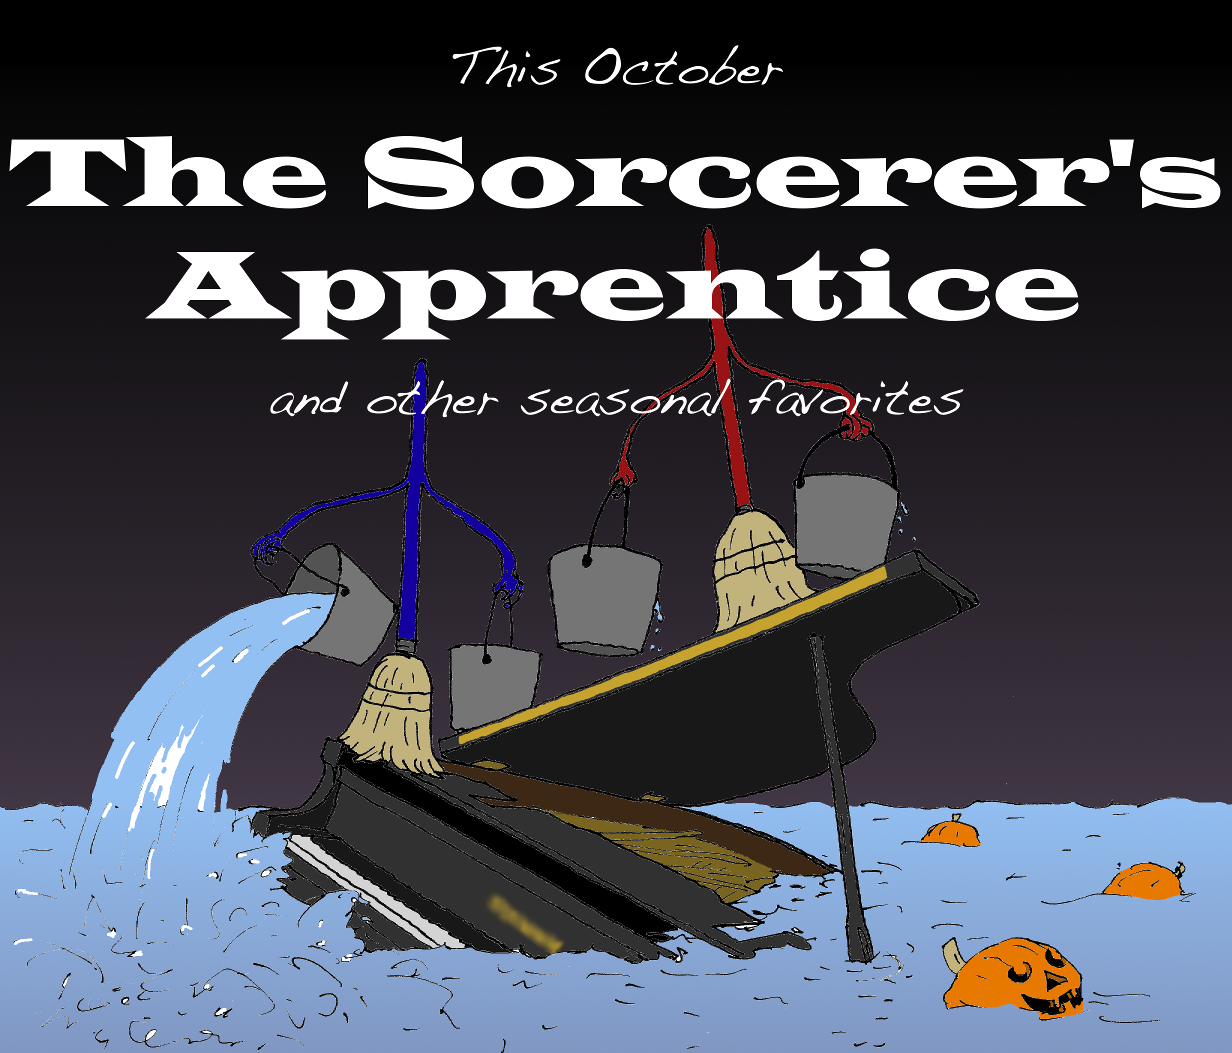 The Sorcerer's Apprentice, and Other Seasonal Favorites